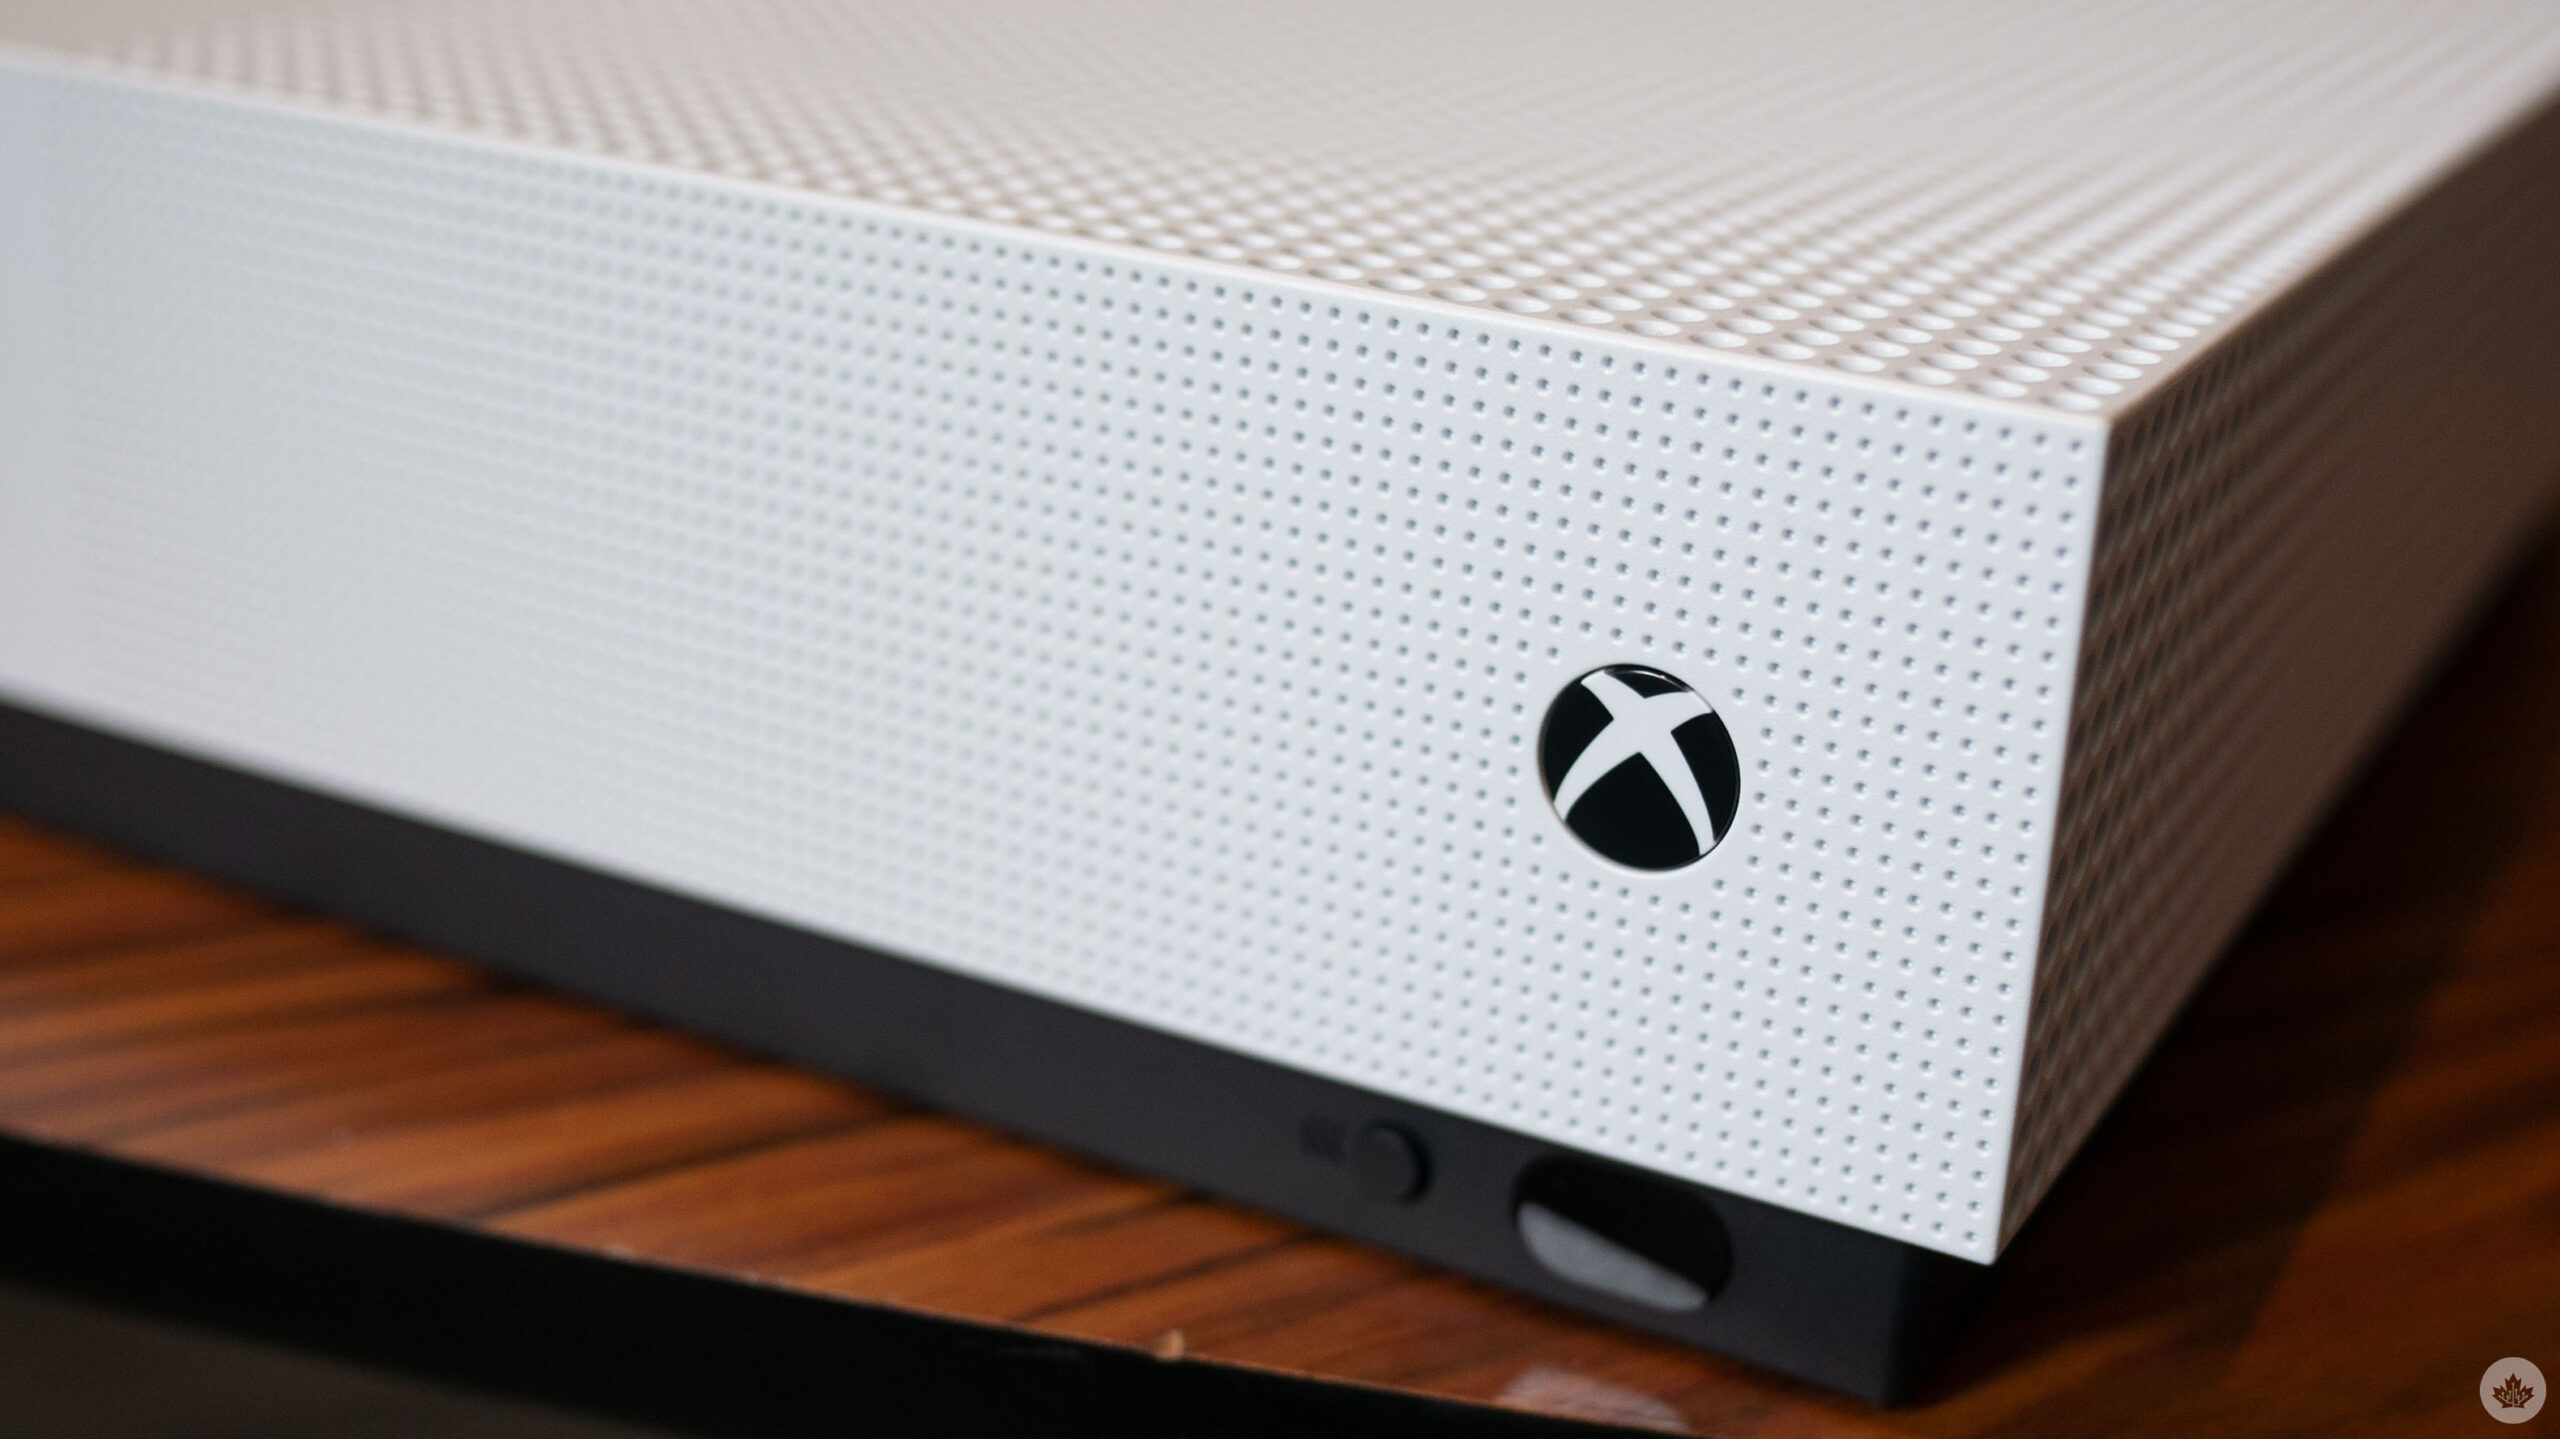 Xbox One X and Xbox One S All-Digital discontinued ahead of Xbox Series X  release